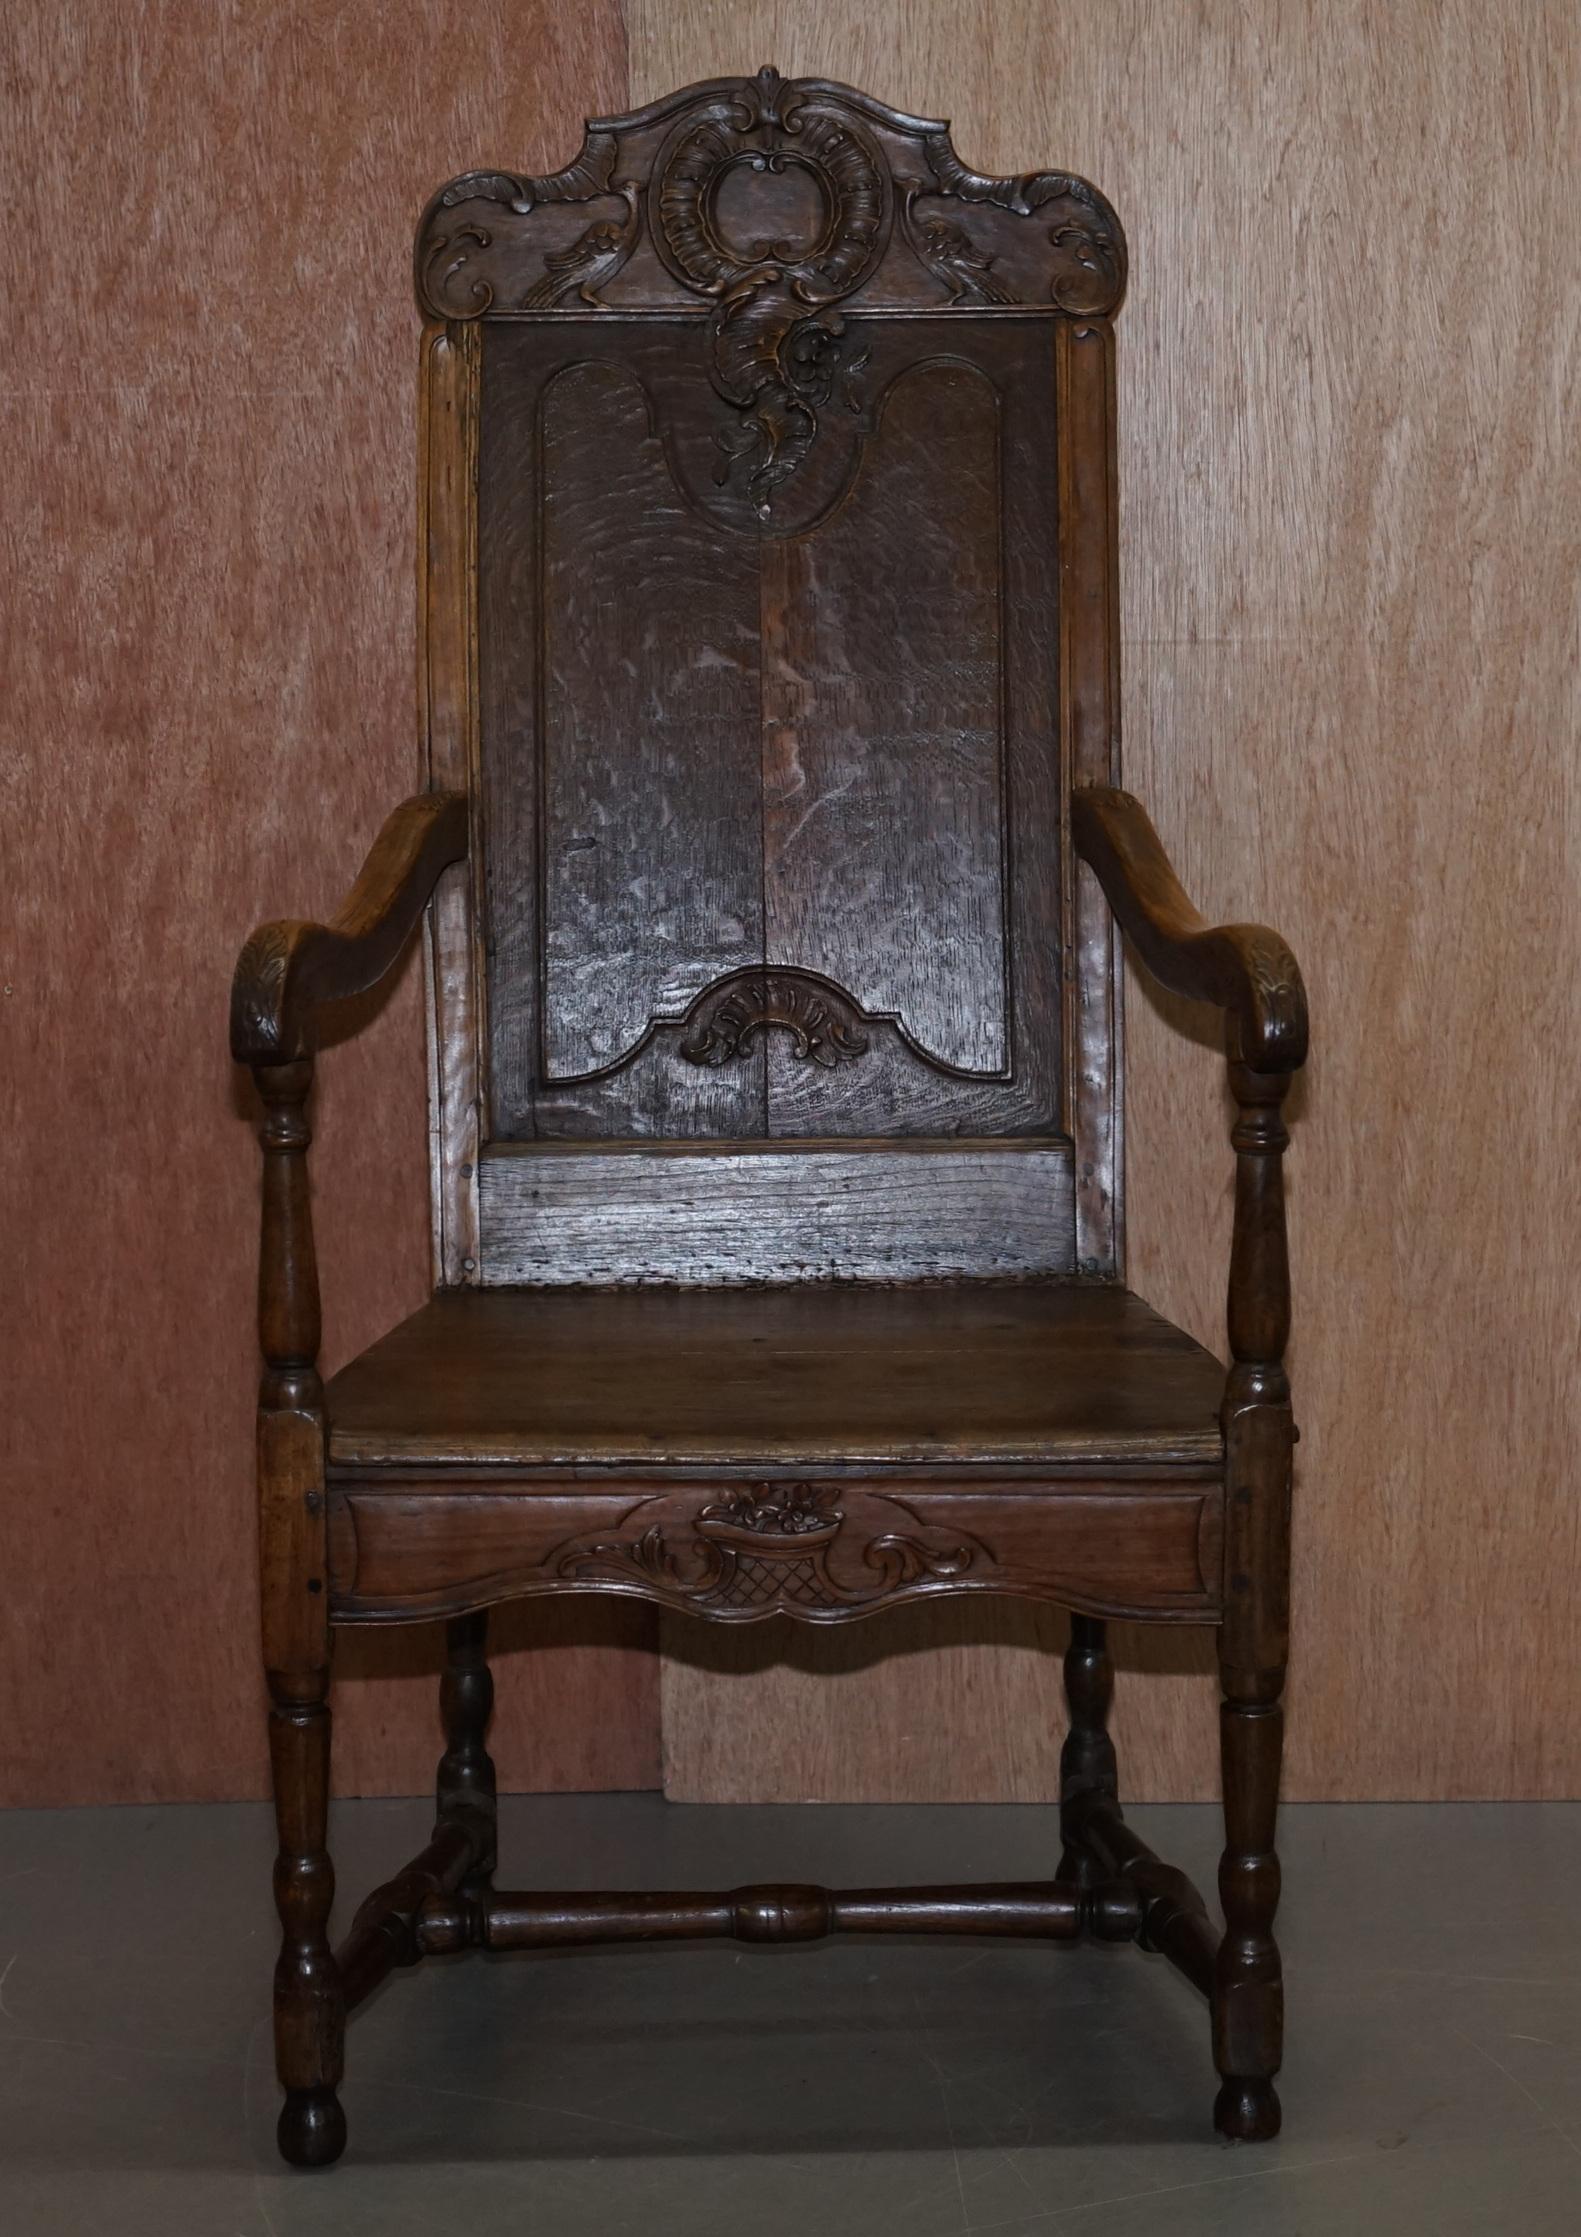 We are delighted to offer for sale this very rare totally original Herve Liege Belgium hand carved oak Wainscot oak armchair circa 1760

A very well made original piece, the chair is known as a Herve Liege chair, they rarely if ever come up for